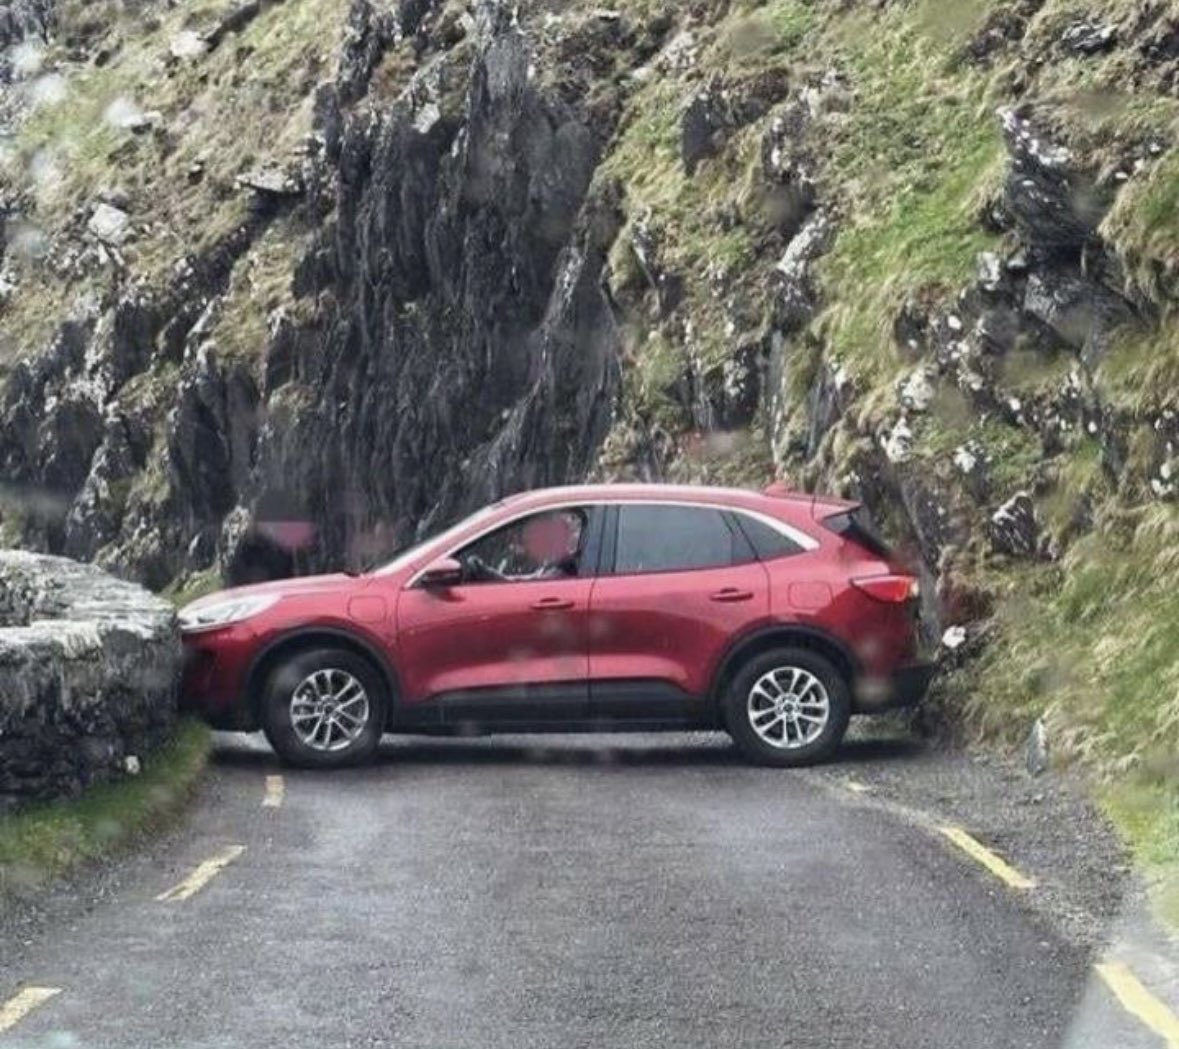 Spotted in Kerry📸 It’s so bad it’s almost impressive 🤣